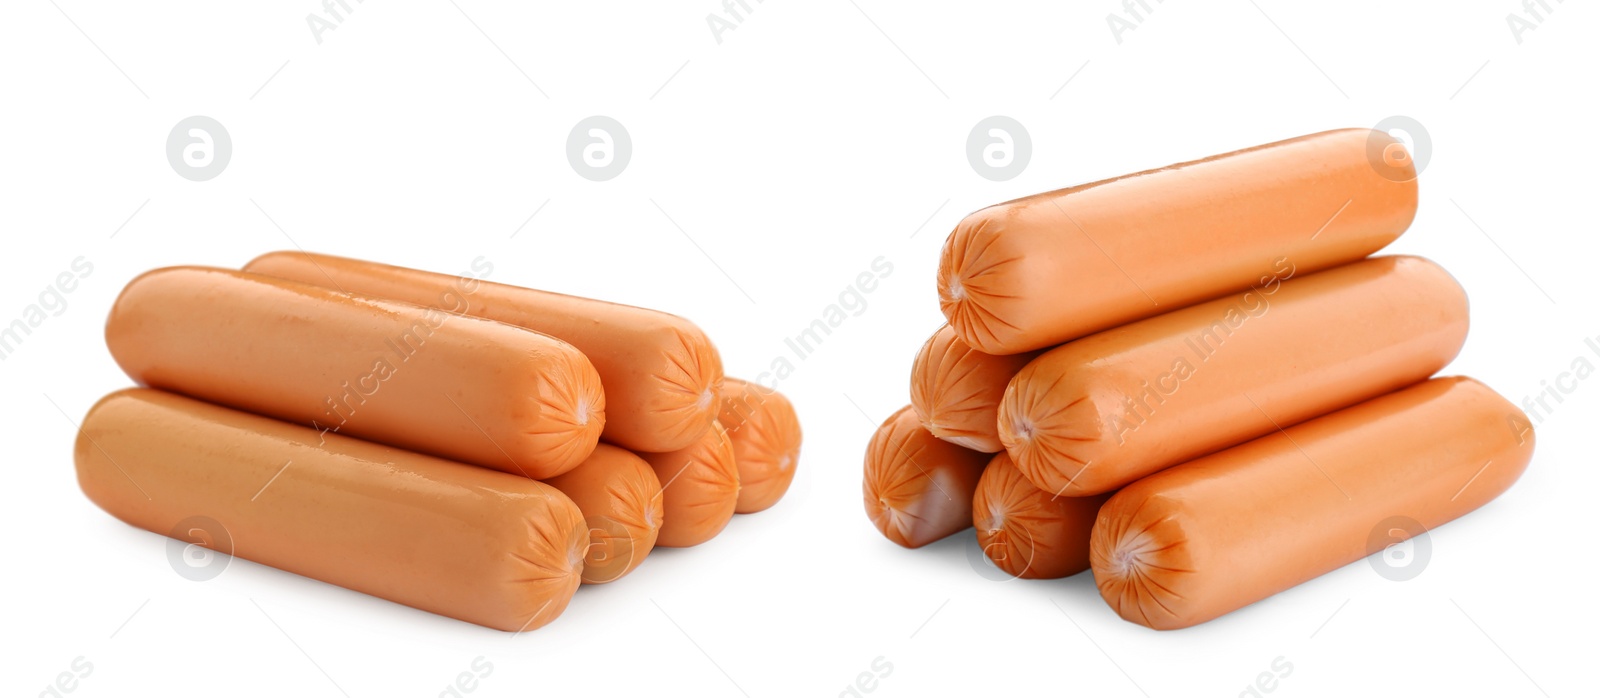 Image of Stacks of fresh raw sausages on white background